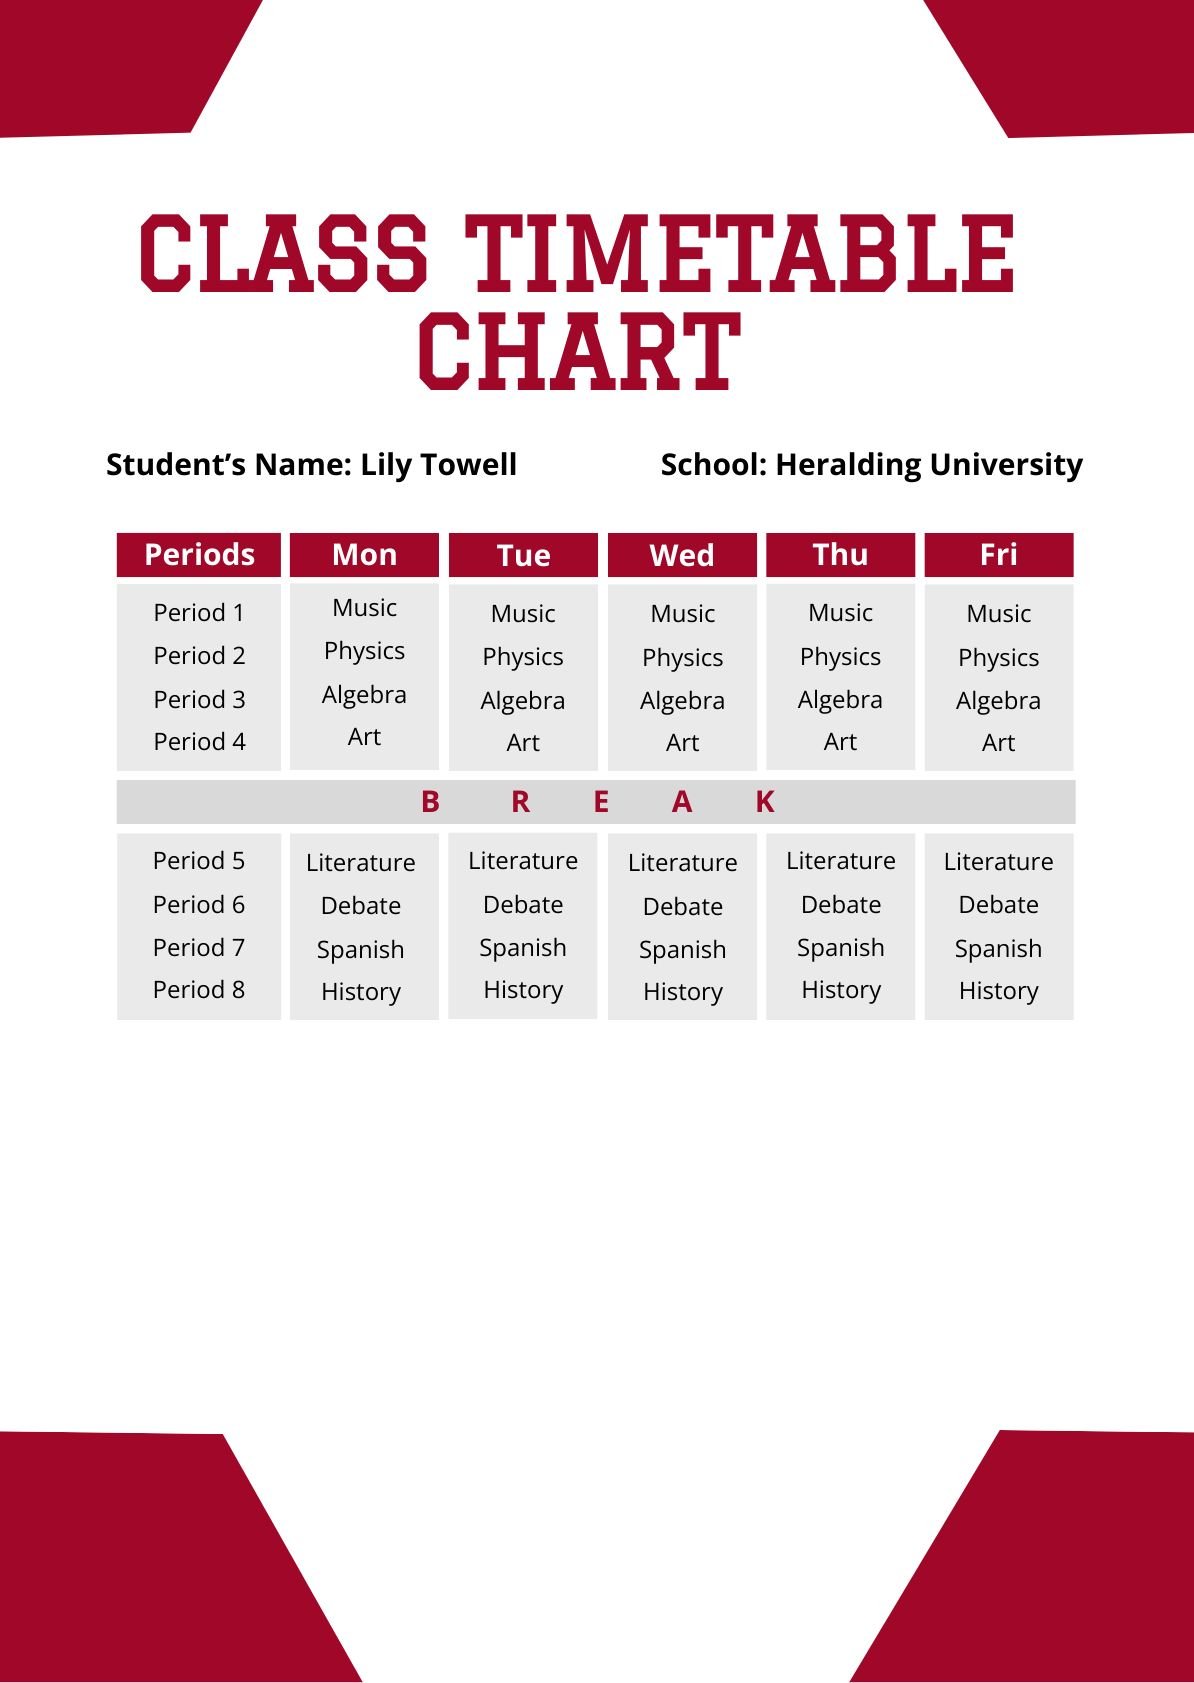 Class Timetable Chart in PDF